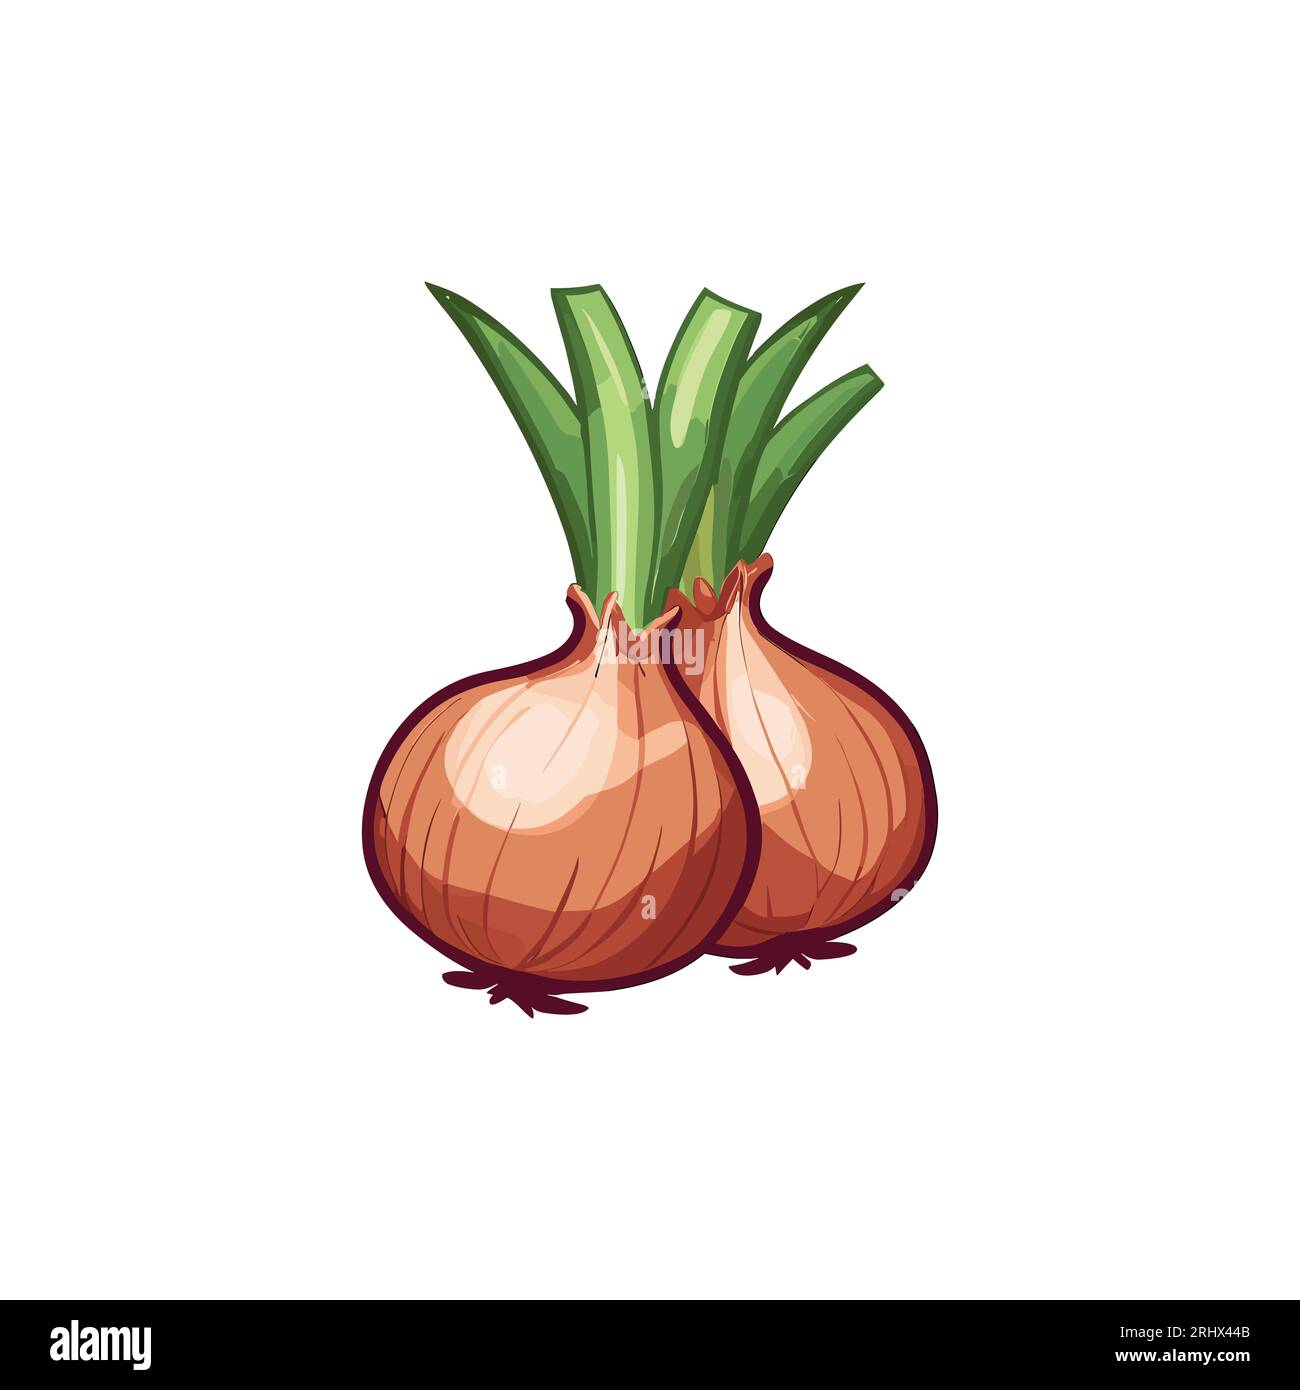 Clipart vector illustration of onions Stock Vector